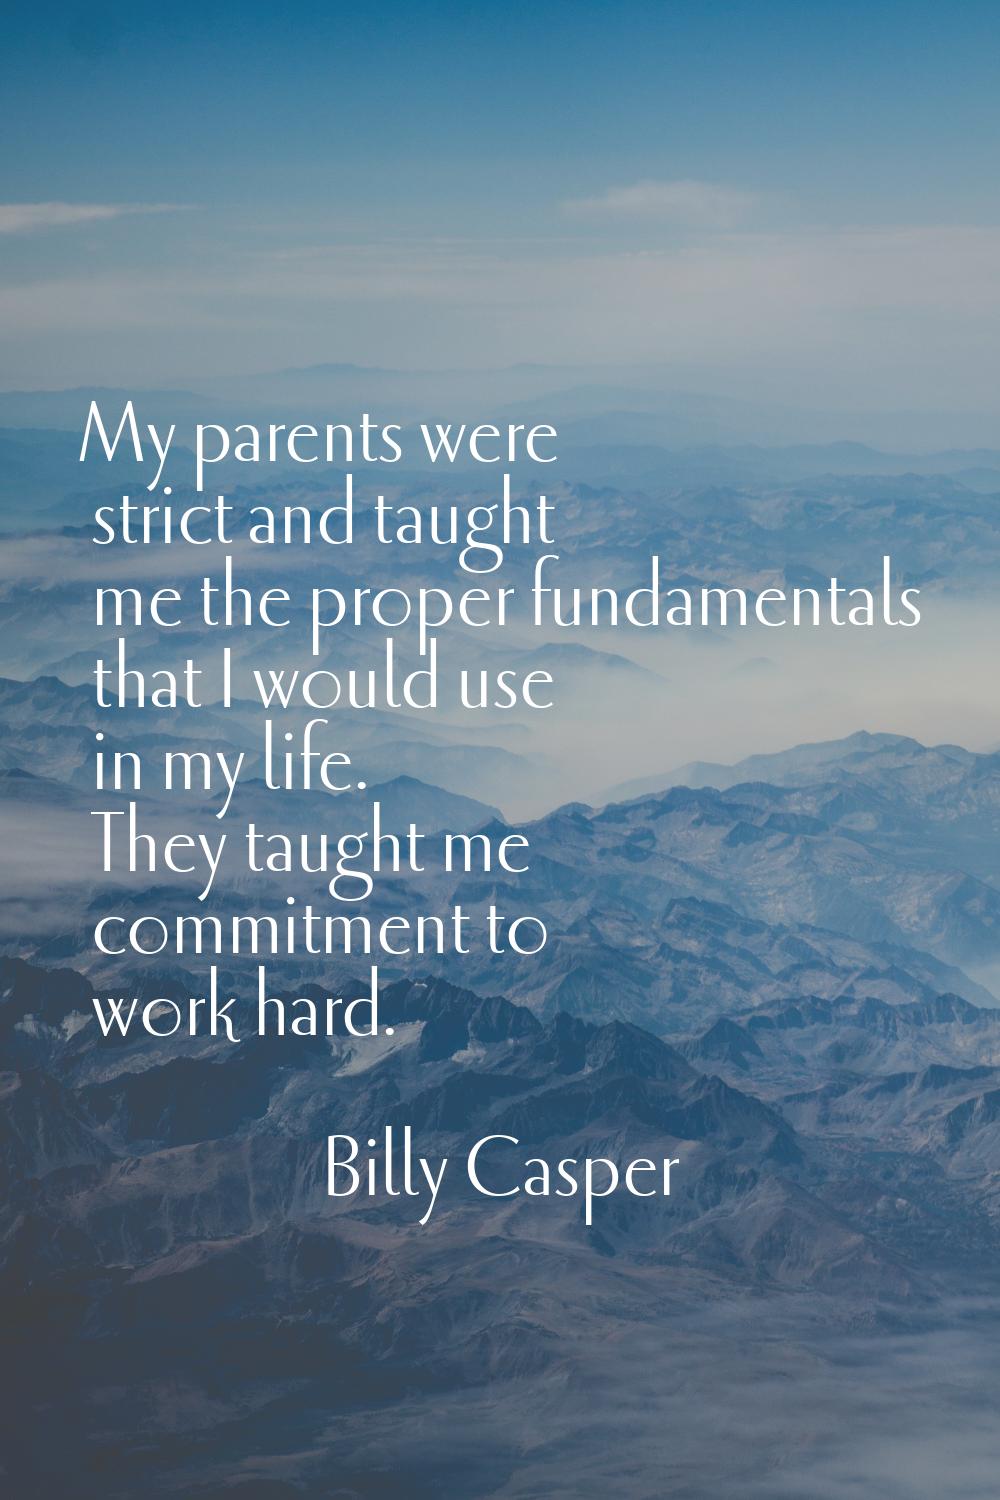 My parents were strict and taught me the proper fundamentals that I would use in my life. They taug